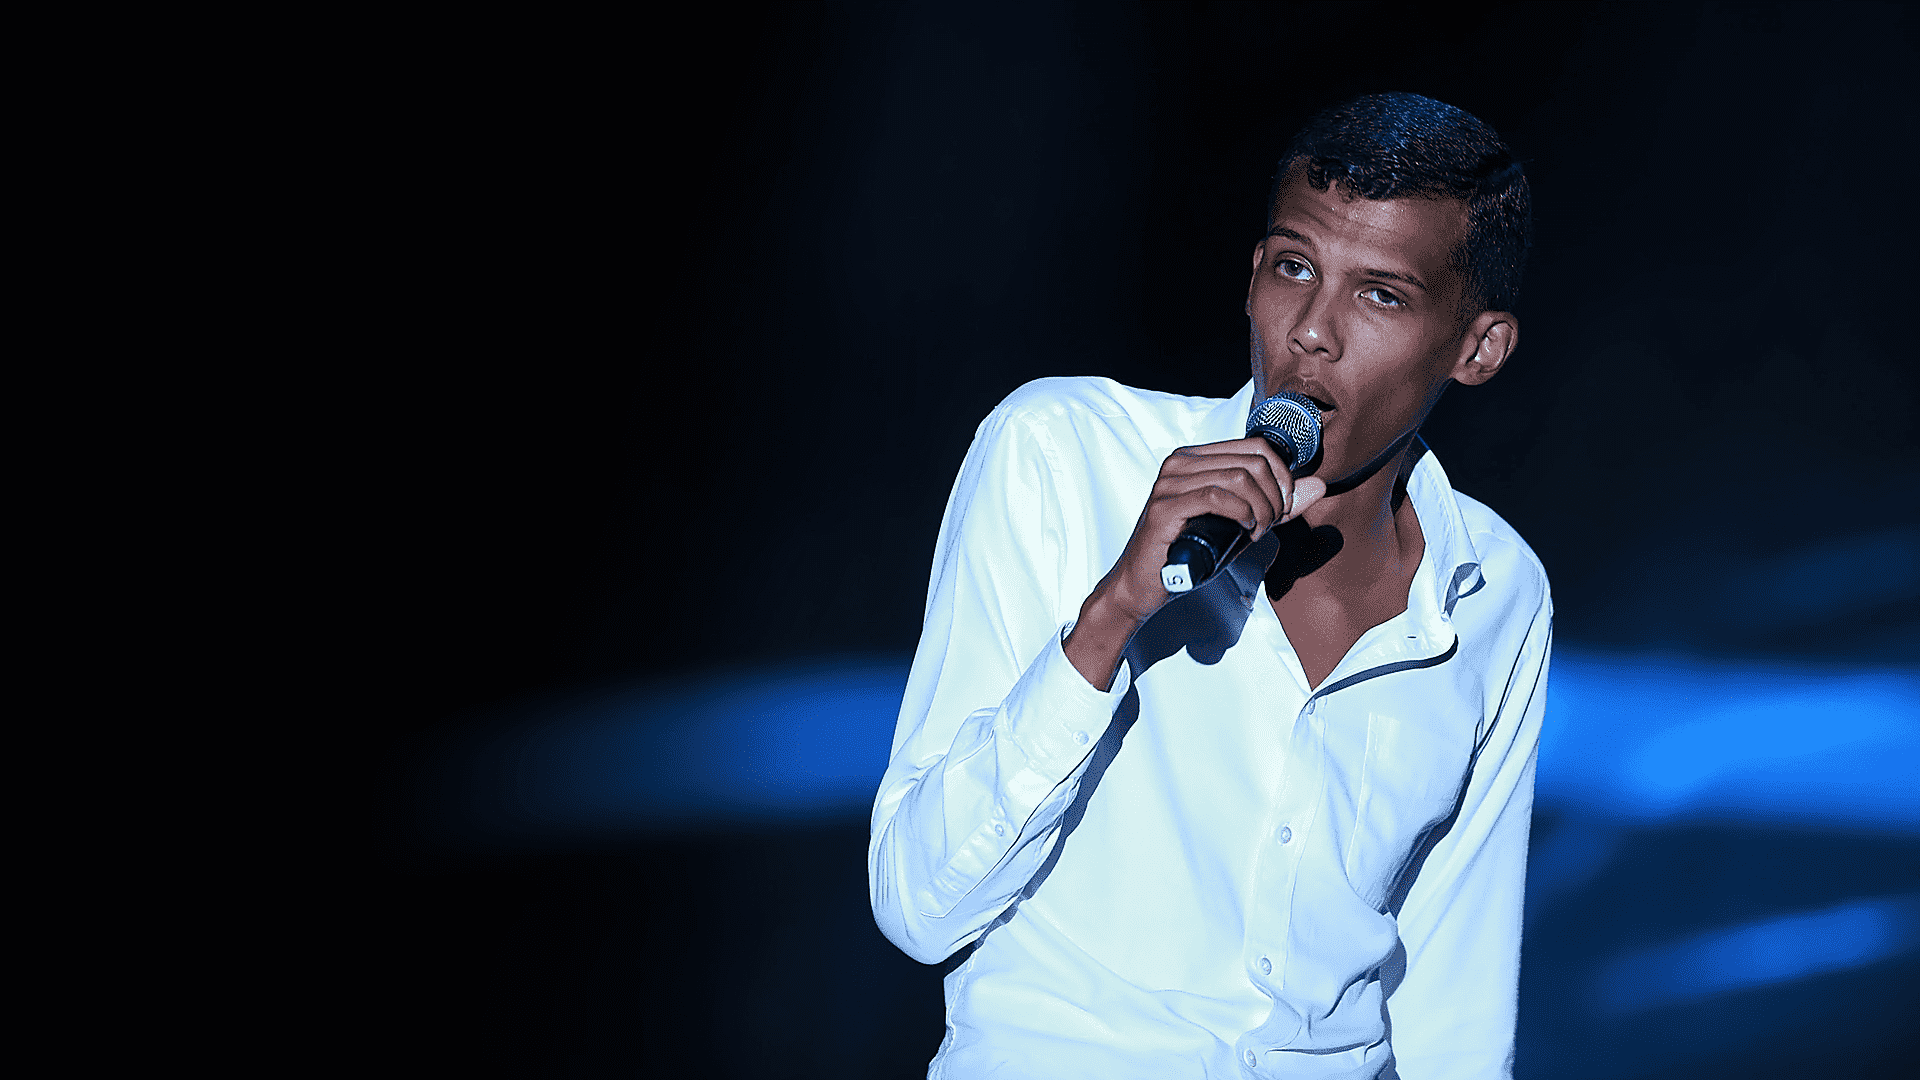 Stromae Stromae Performs 'Formidable' at the World Music Awards.